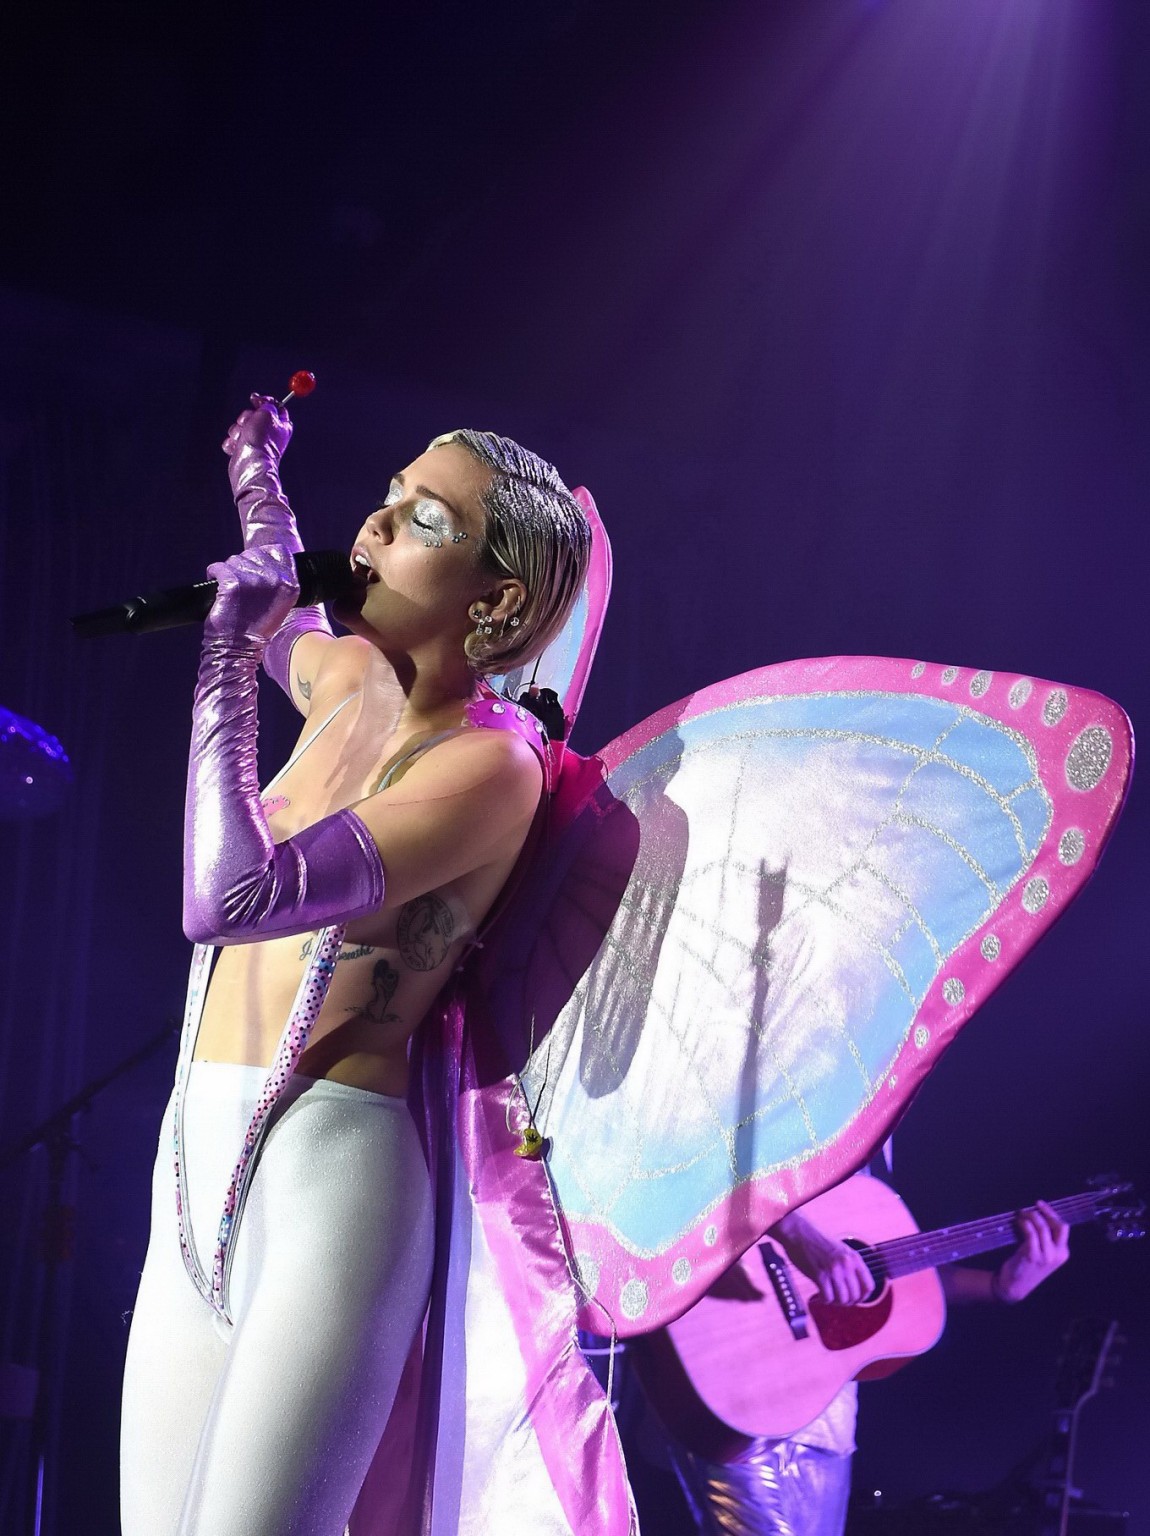 Miley Cyrus topless wearing butterfly pasties and pantyhose while performing at  #75164637